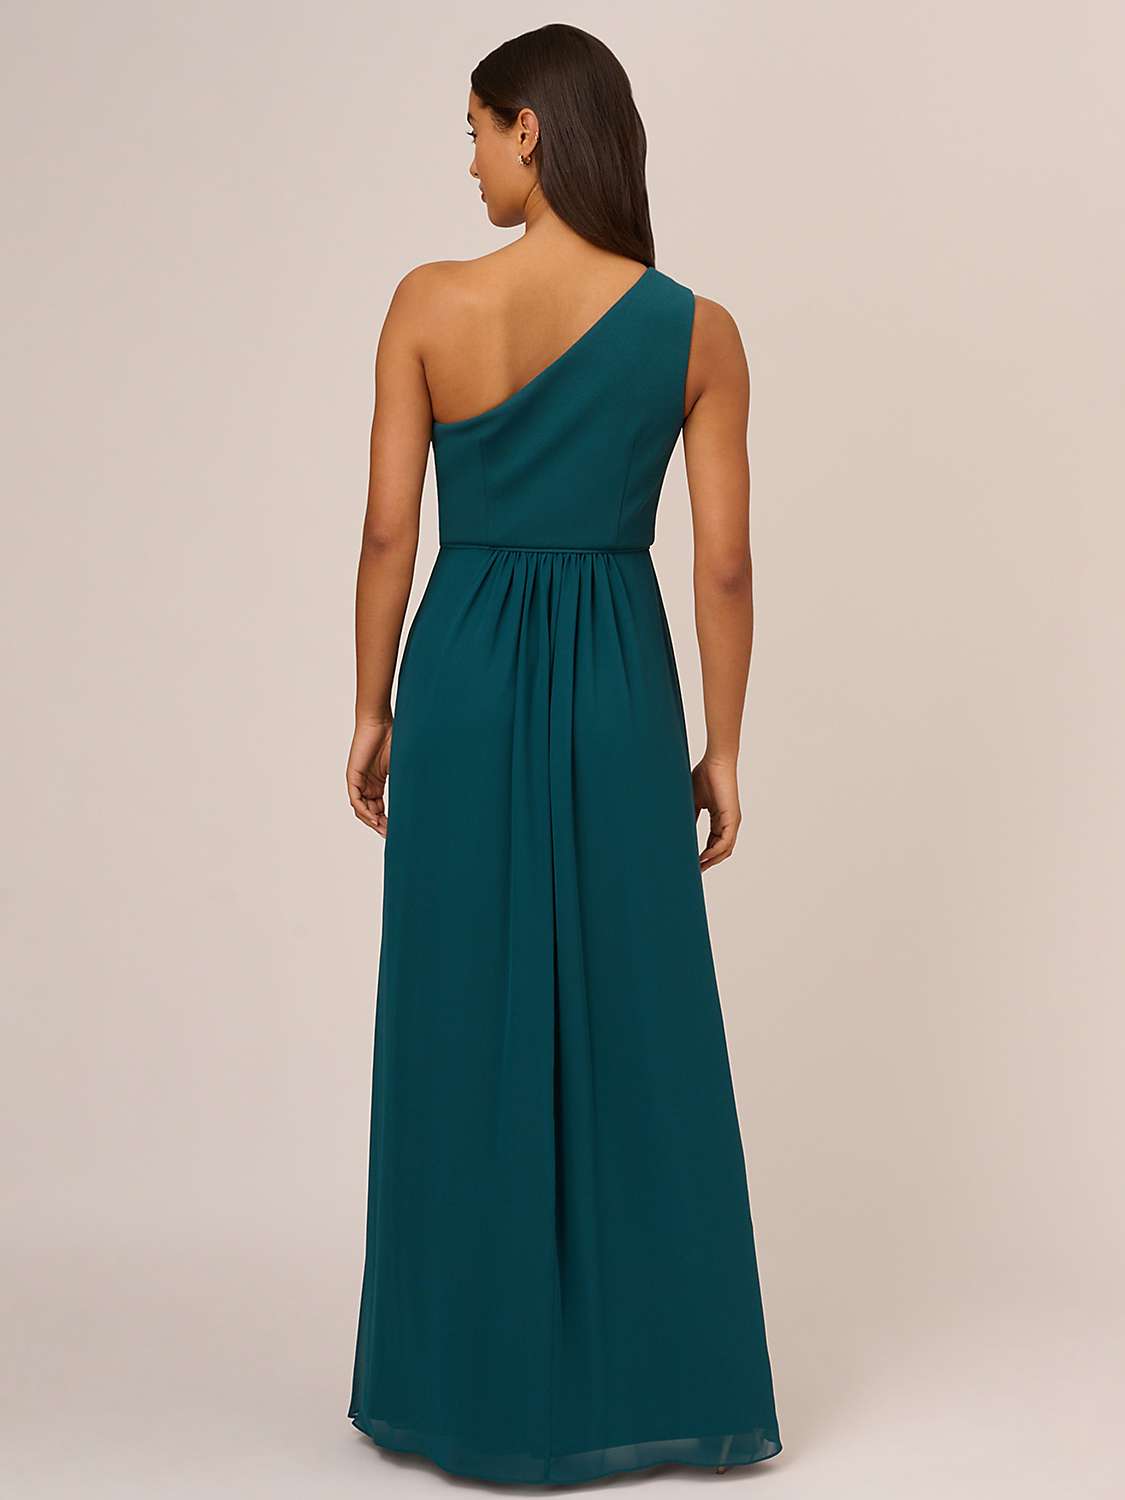 Buy Adrianna Papell One Shoulder Chiffon Gown Online at johnlewis.com